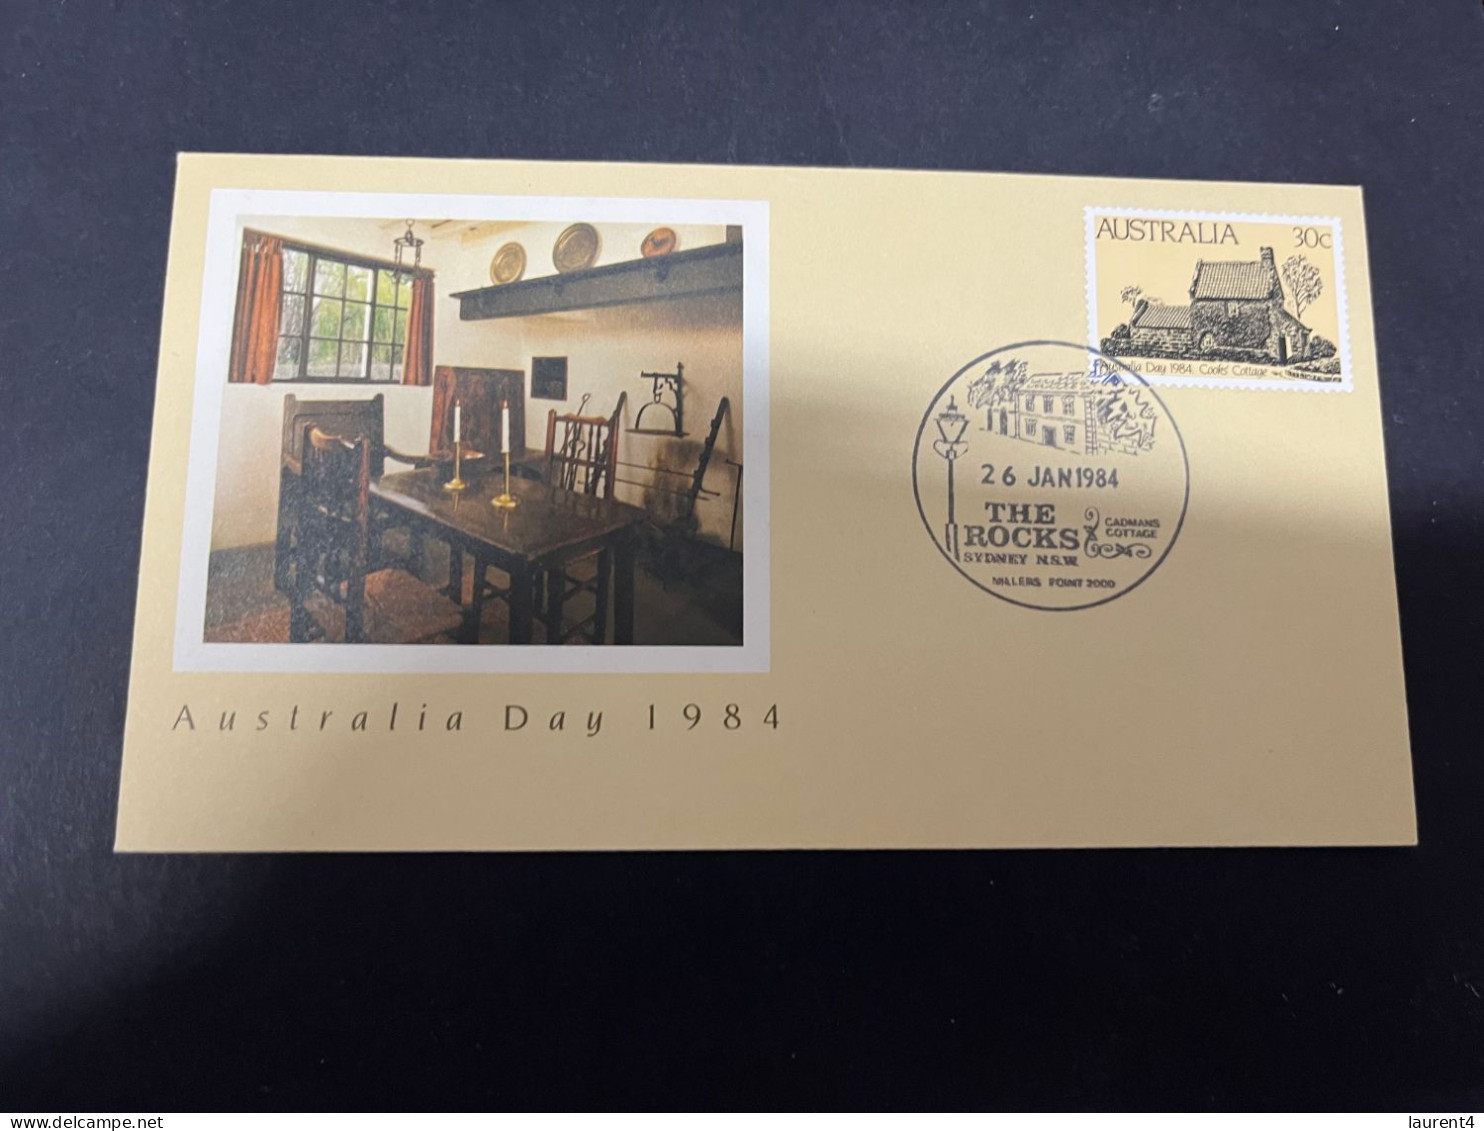 26-3-2024 (4 Y 9) Australia (3 With With Different Postmark) FDC - Australia Day 1984 - FDC